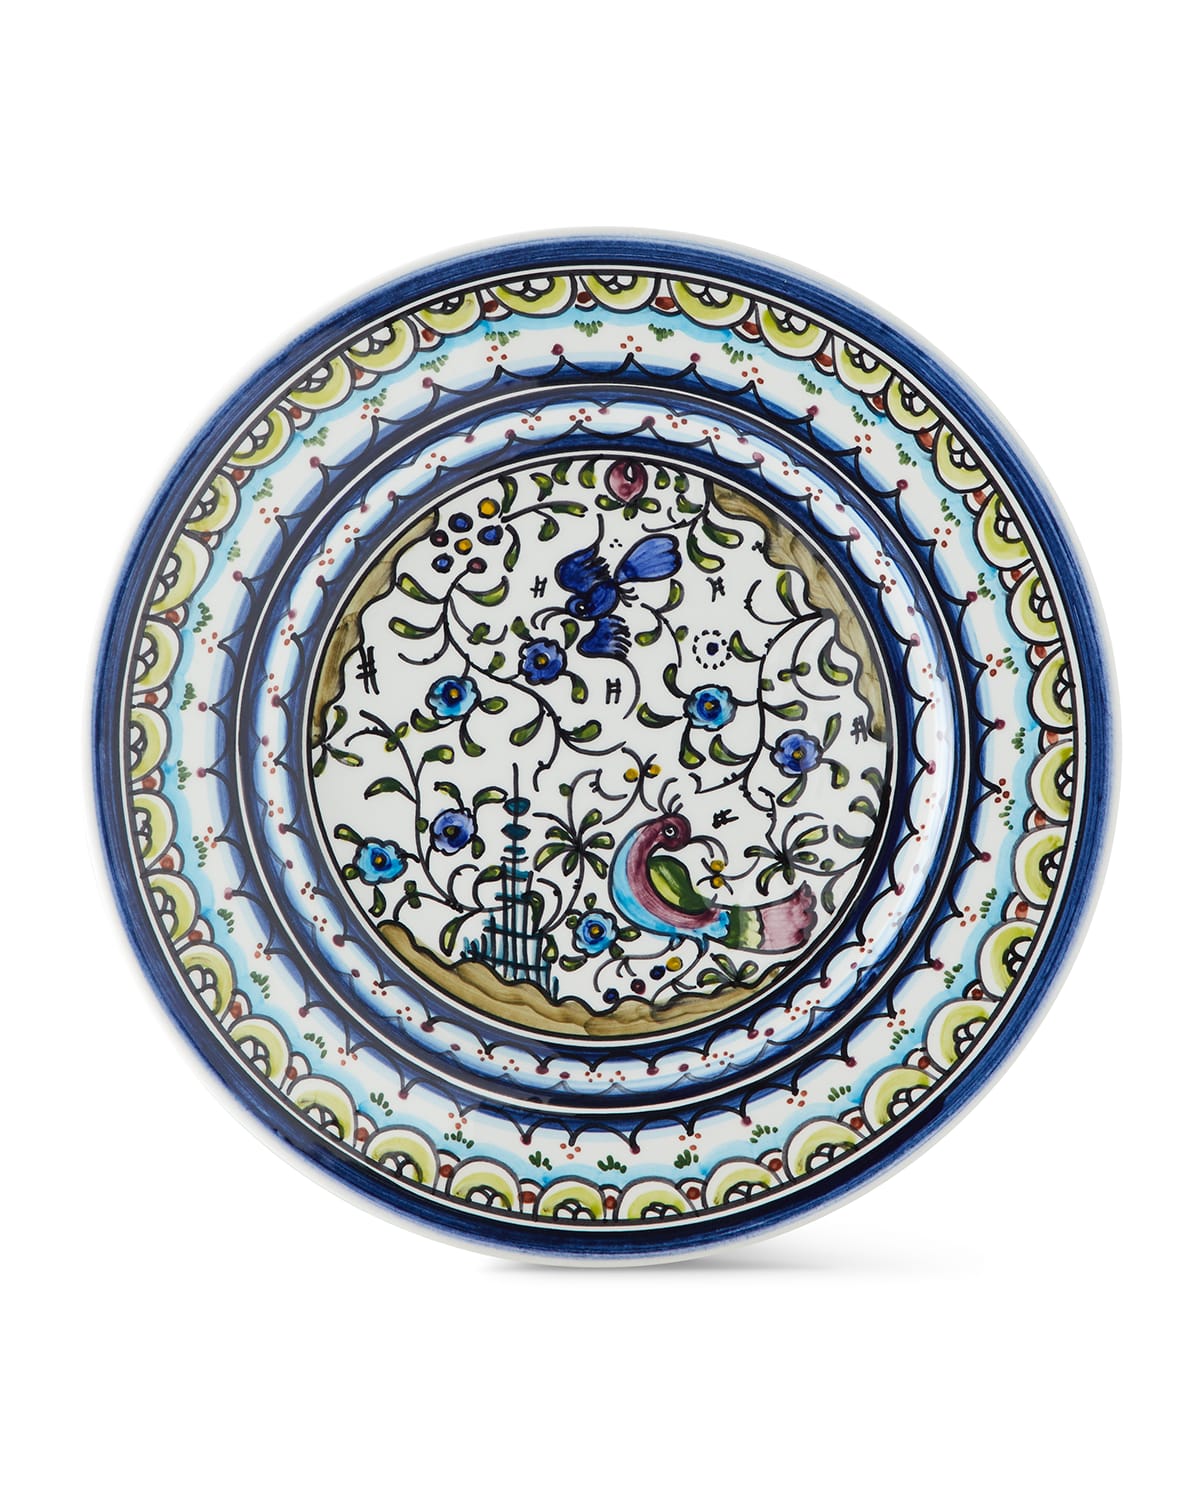 Neiman Marcus Pavoes Blue And Green Salad Plates, Set Of 4